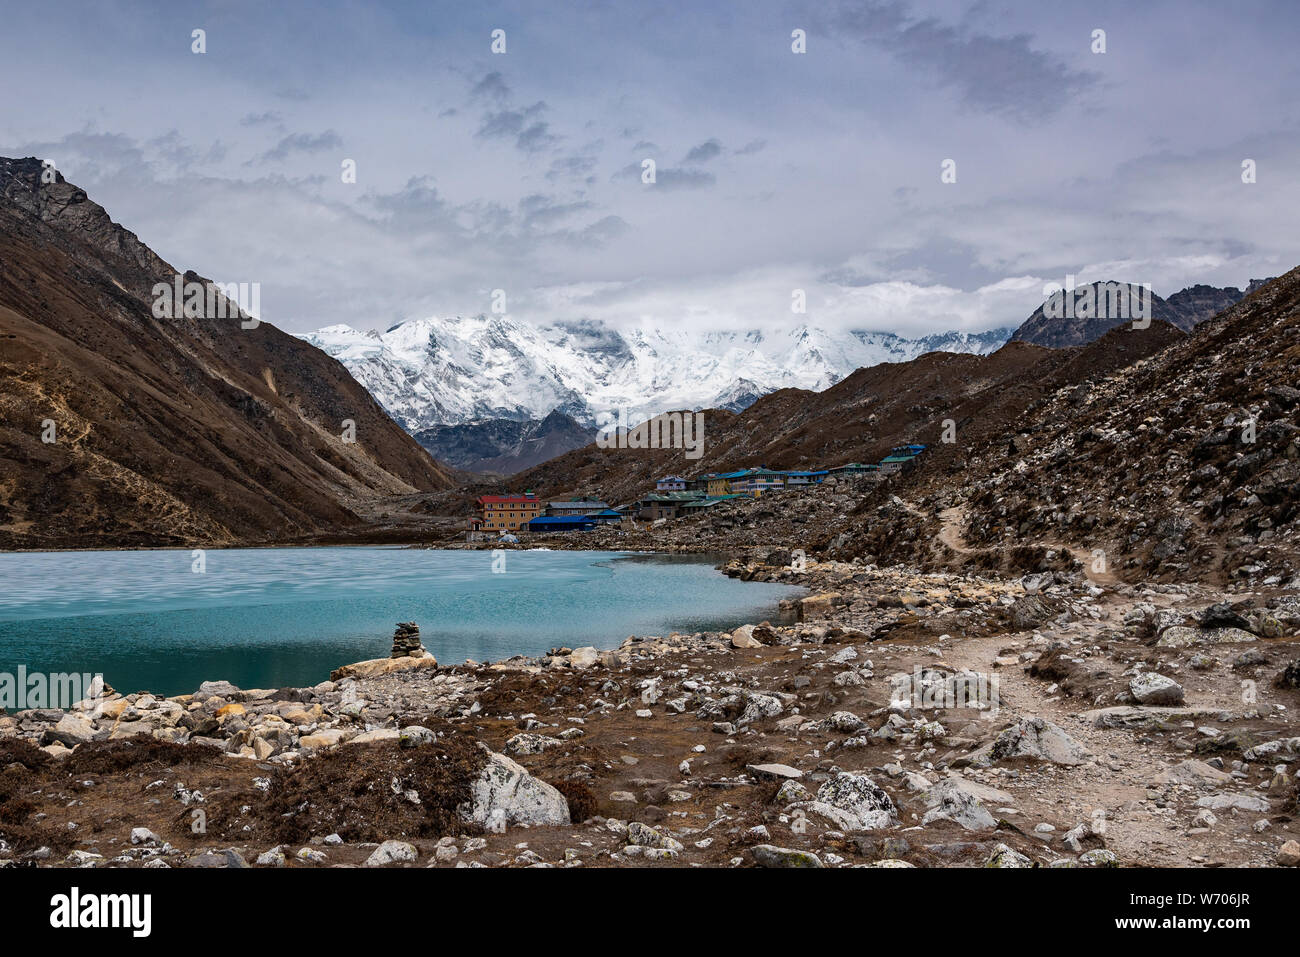 Gokyo lake with stone pyramid laid on its shore, and narrow trail leading to Gokyo town Stock Photo